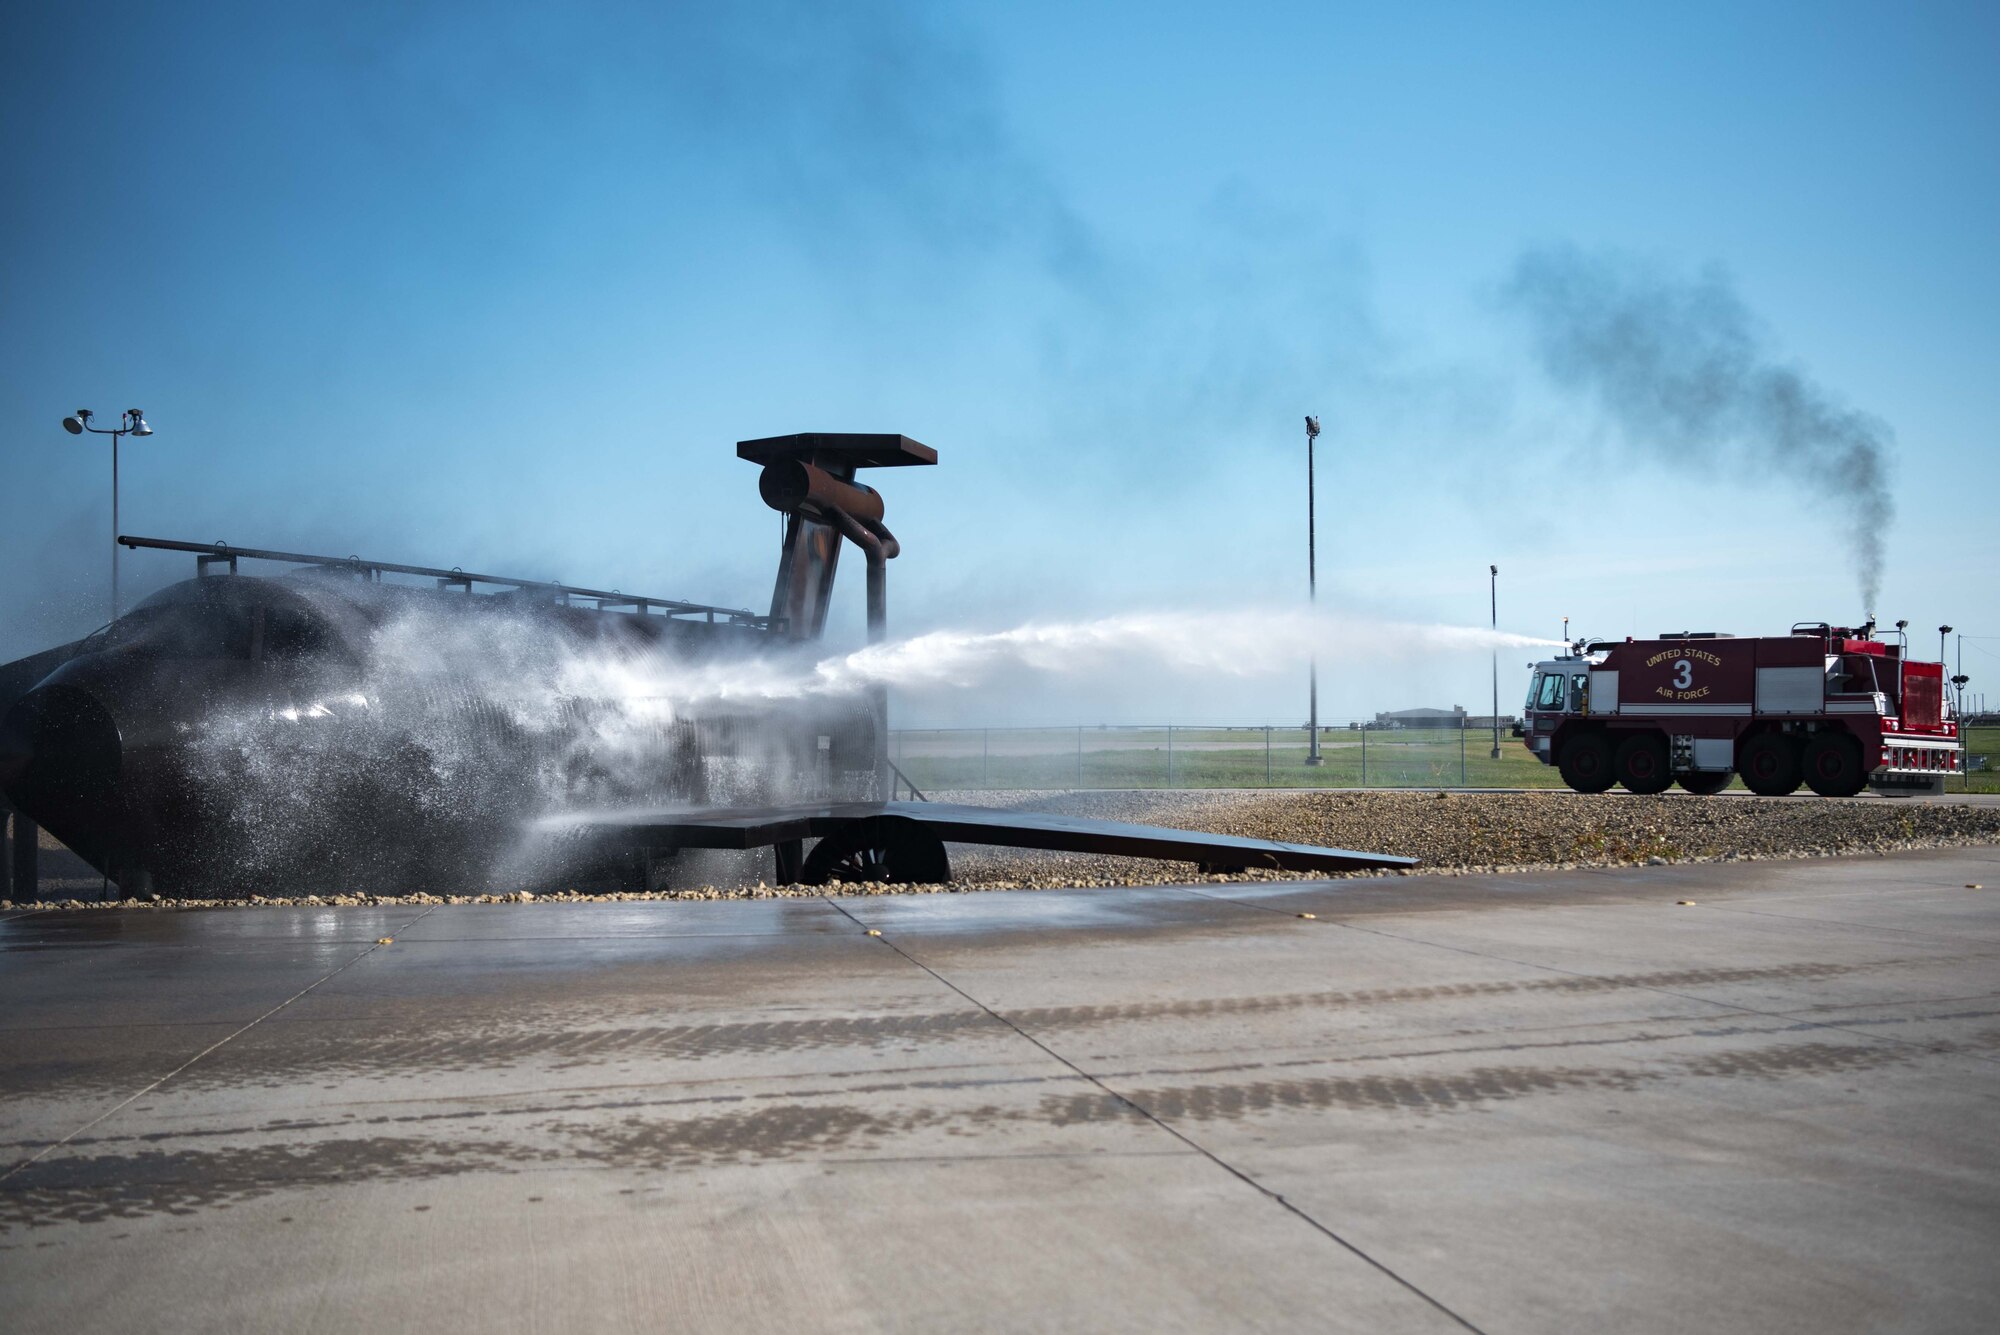 Airman 1st Class Jeff Farrell, 22nd Civil Engineer Squadron fire protection apprentice, uses an aerospace protection aircraft rescue firetruck to put out a simulated fire Aug. 4, 2020, at McConnell Air Force Base, Kansas. The fire department conducts weekly ladder and structural firefighting training for all members and required to conduct at least two aircraft and structured burn training annually. (U.S. Air Force photo by Senior Airman Alexi Bosarge)